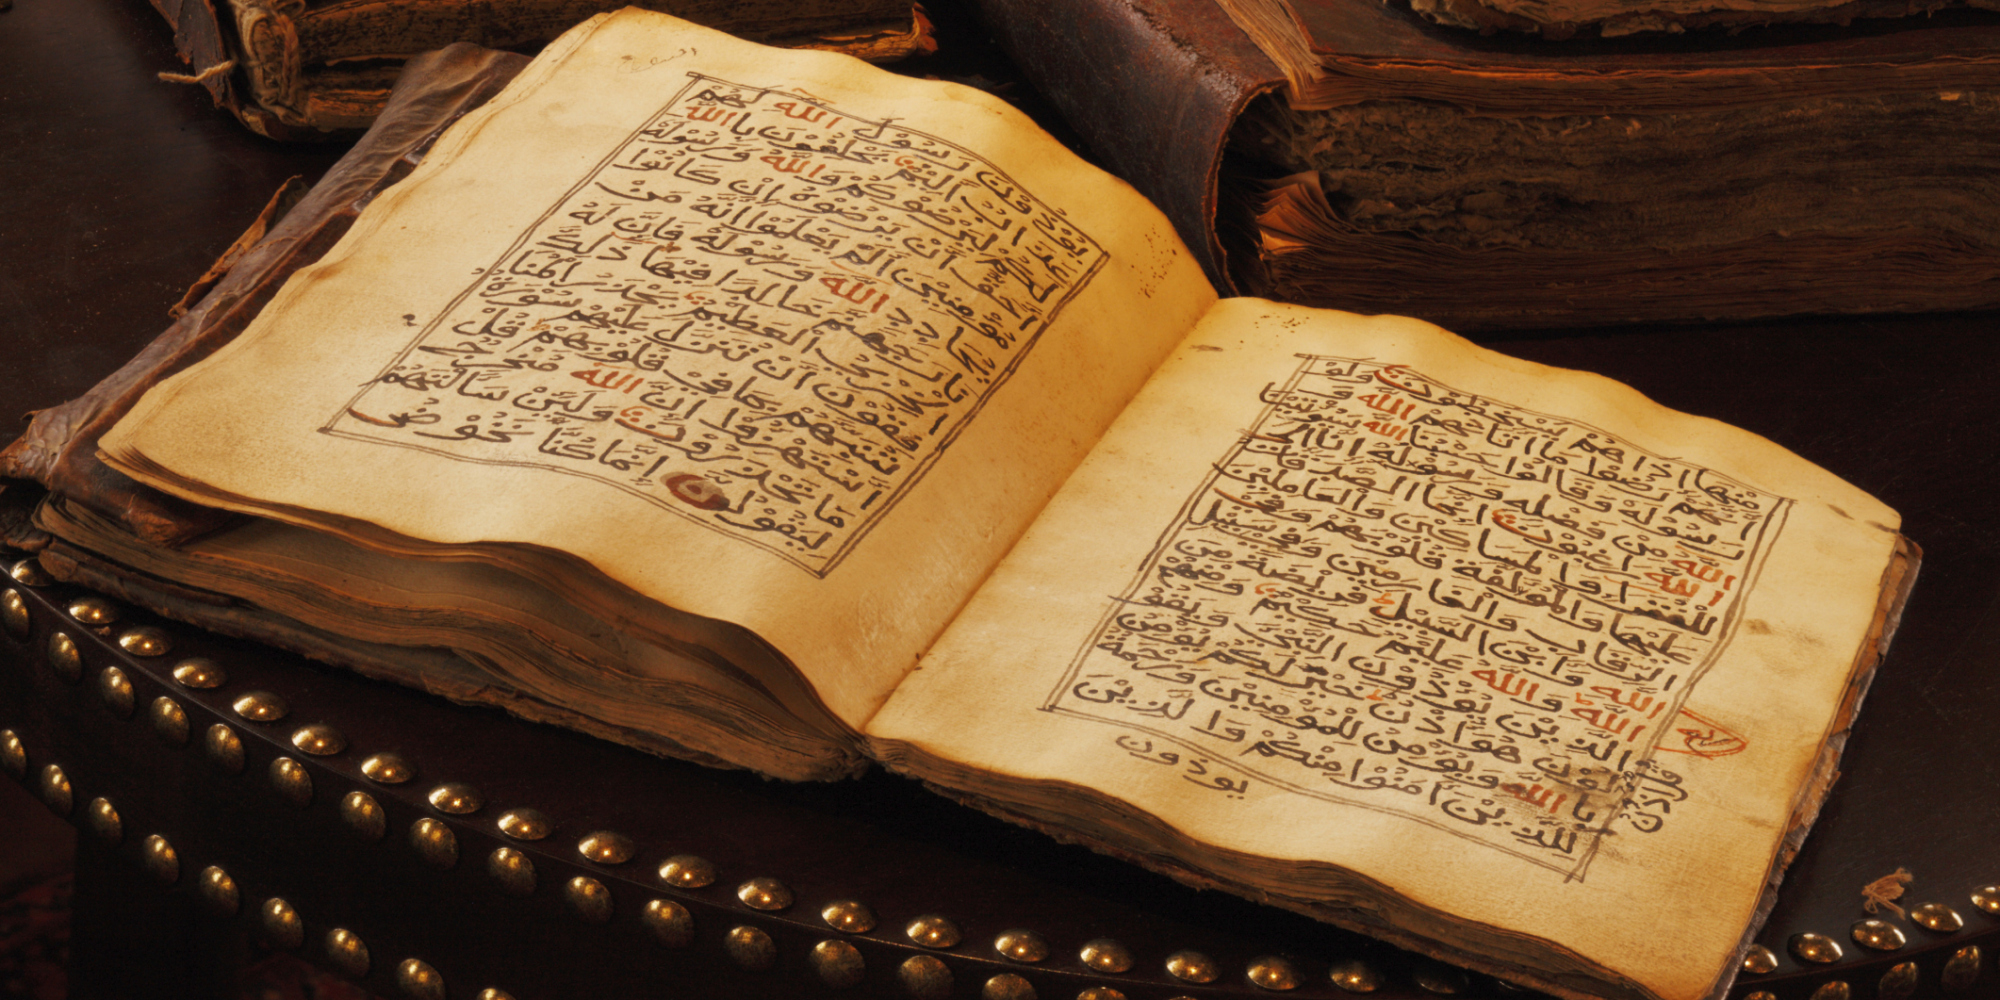 Qur’anic Reflections